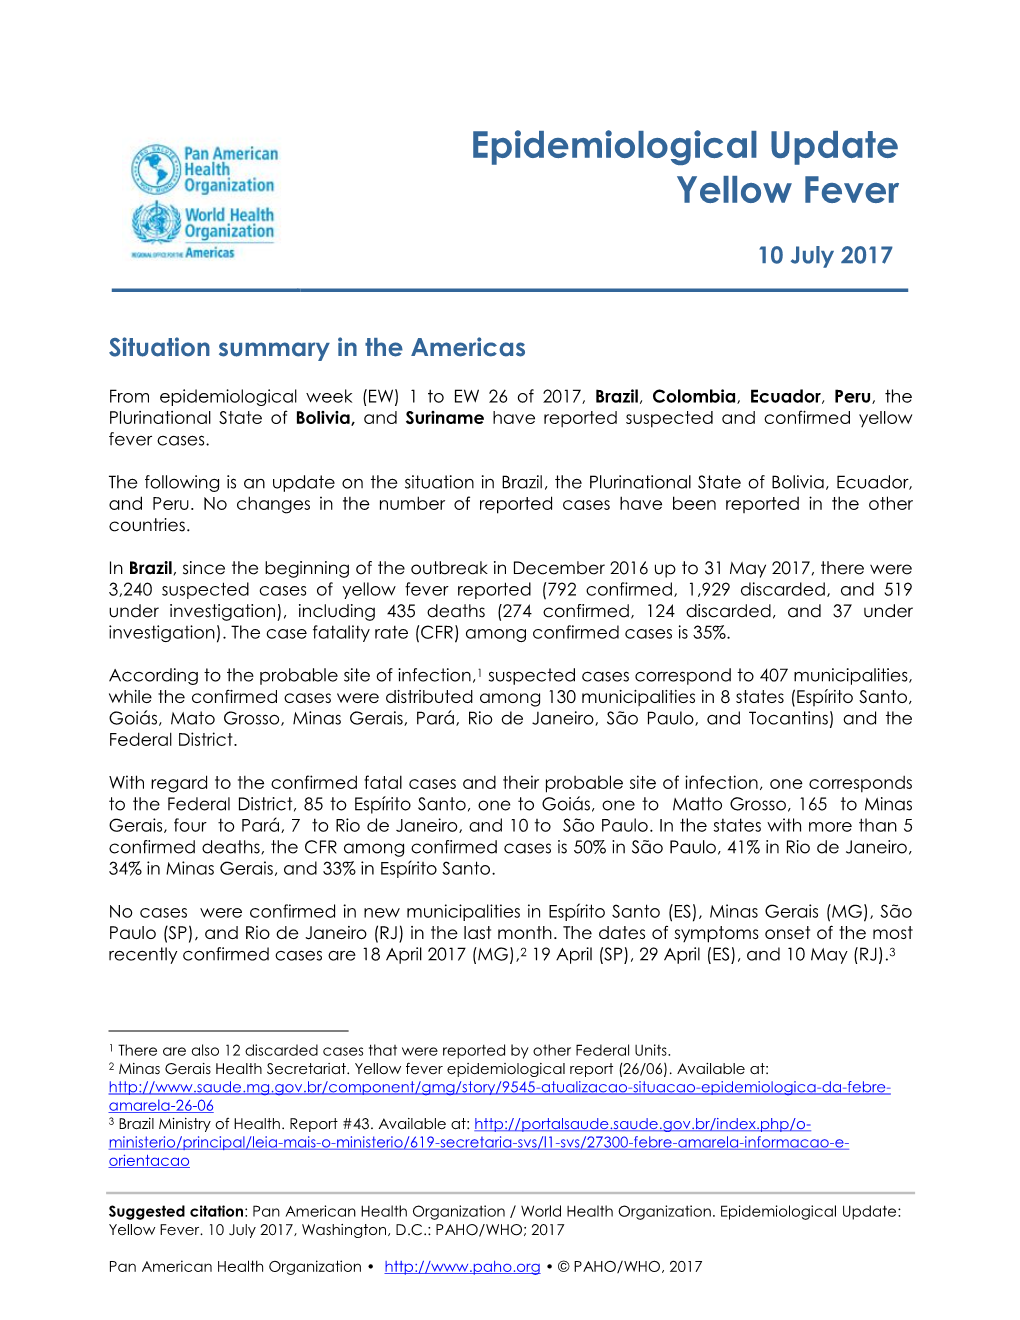 Epidemiological Update Yellow Fever